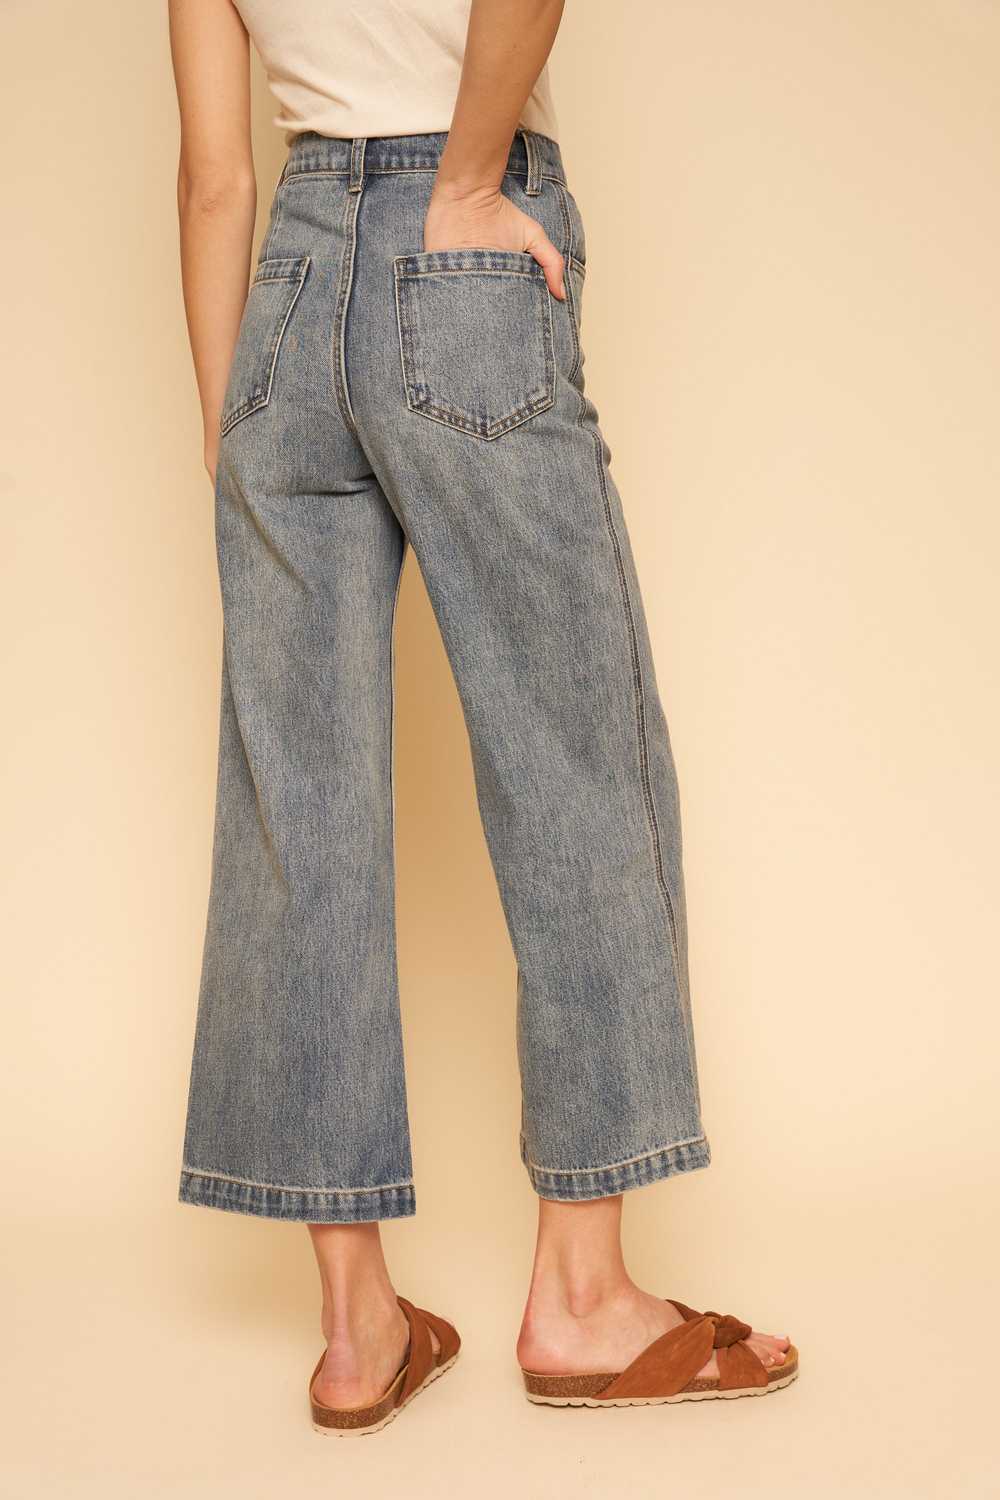 Whimsy and Row Flora Pant in Light Denim Wide Leg - image 3